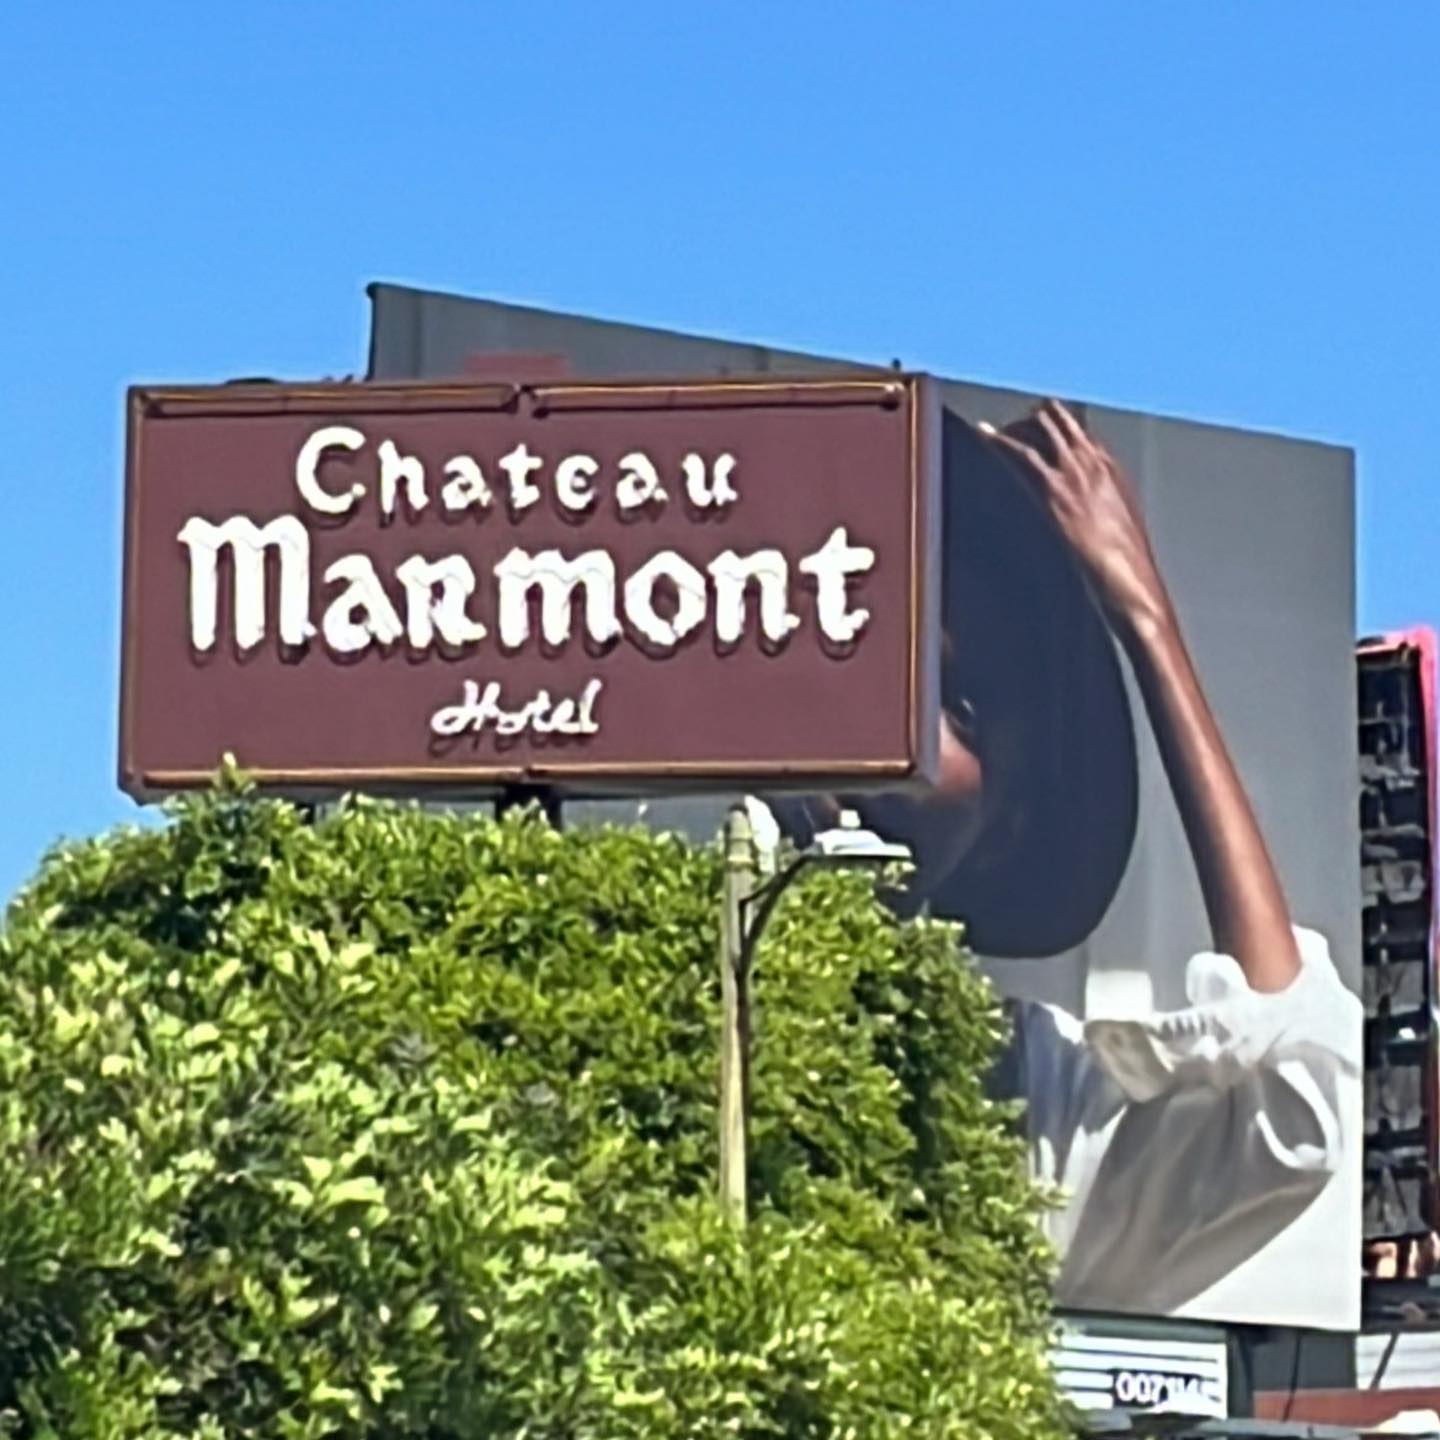 Summers are better at the #ChateauMarmont 🛟